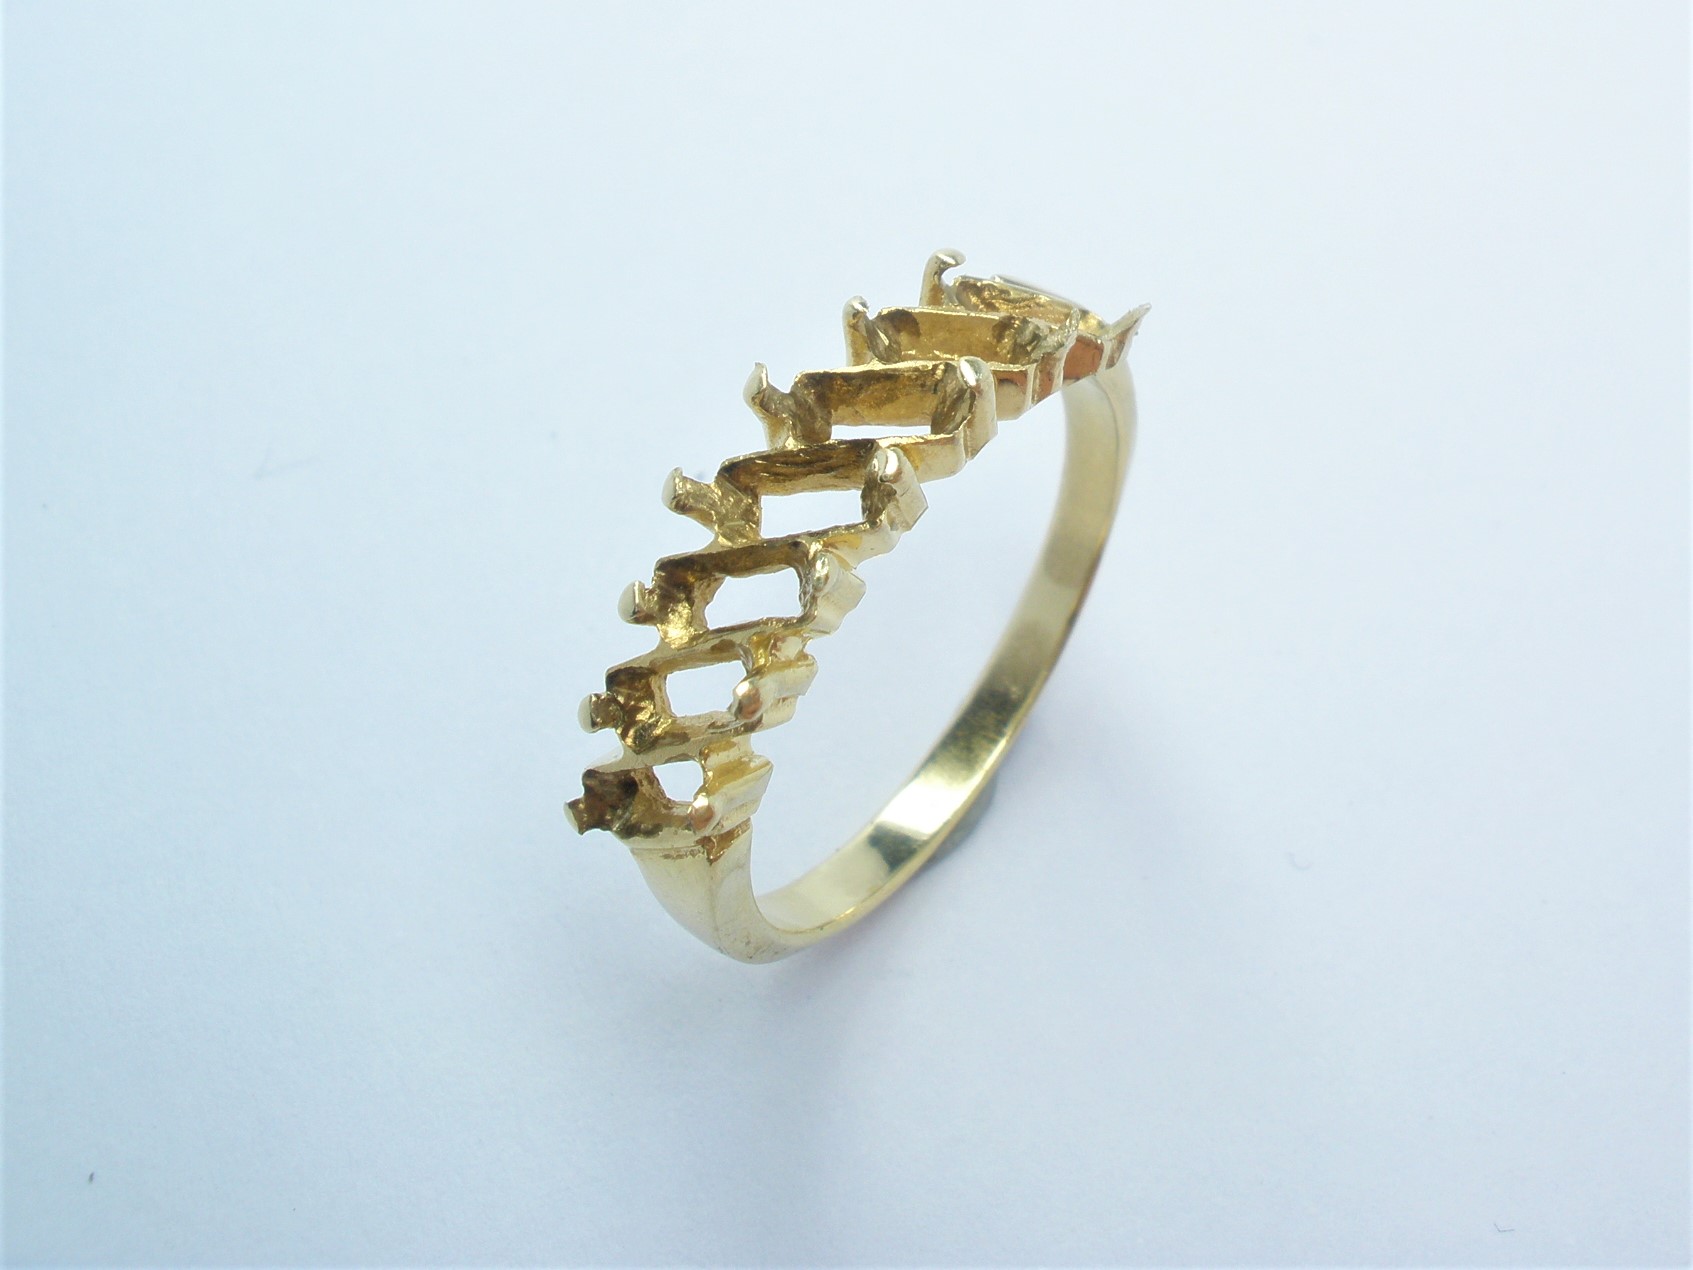 7 stone baguette diamond wedding ring remodelled in 18ct yellow gold and platinum